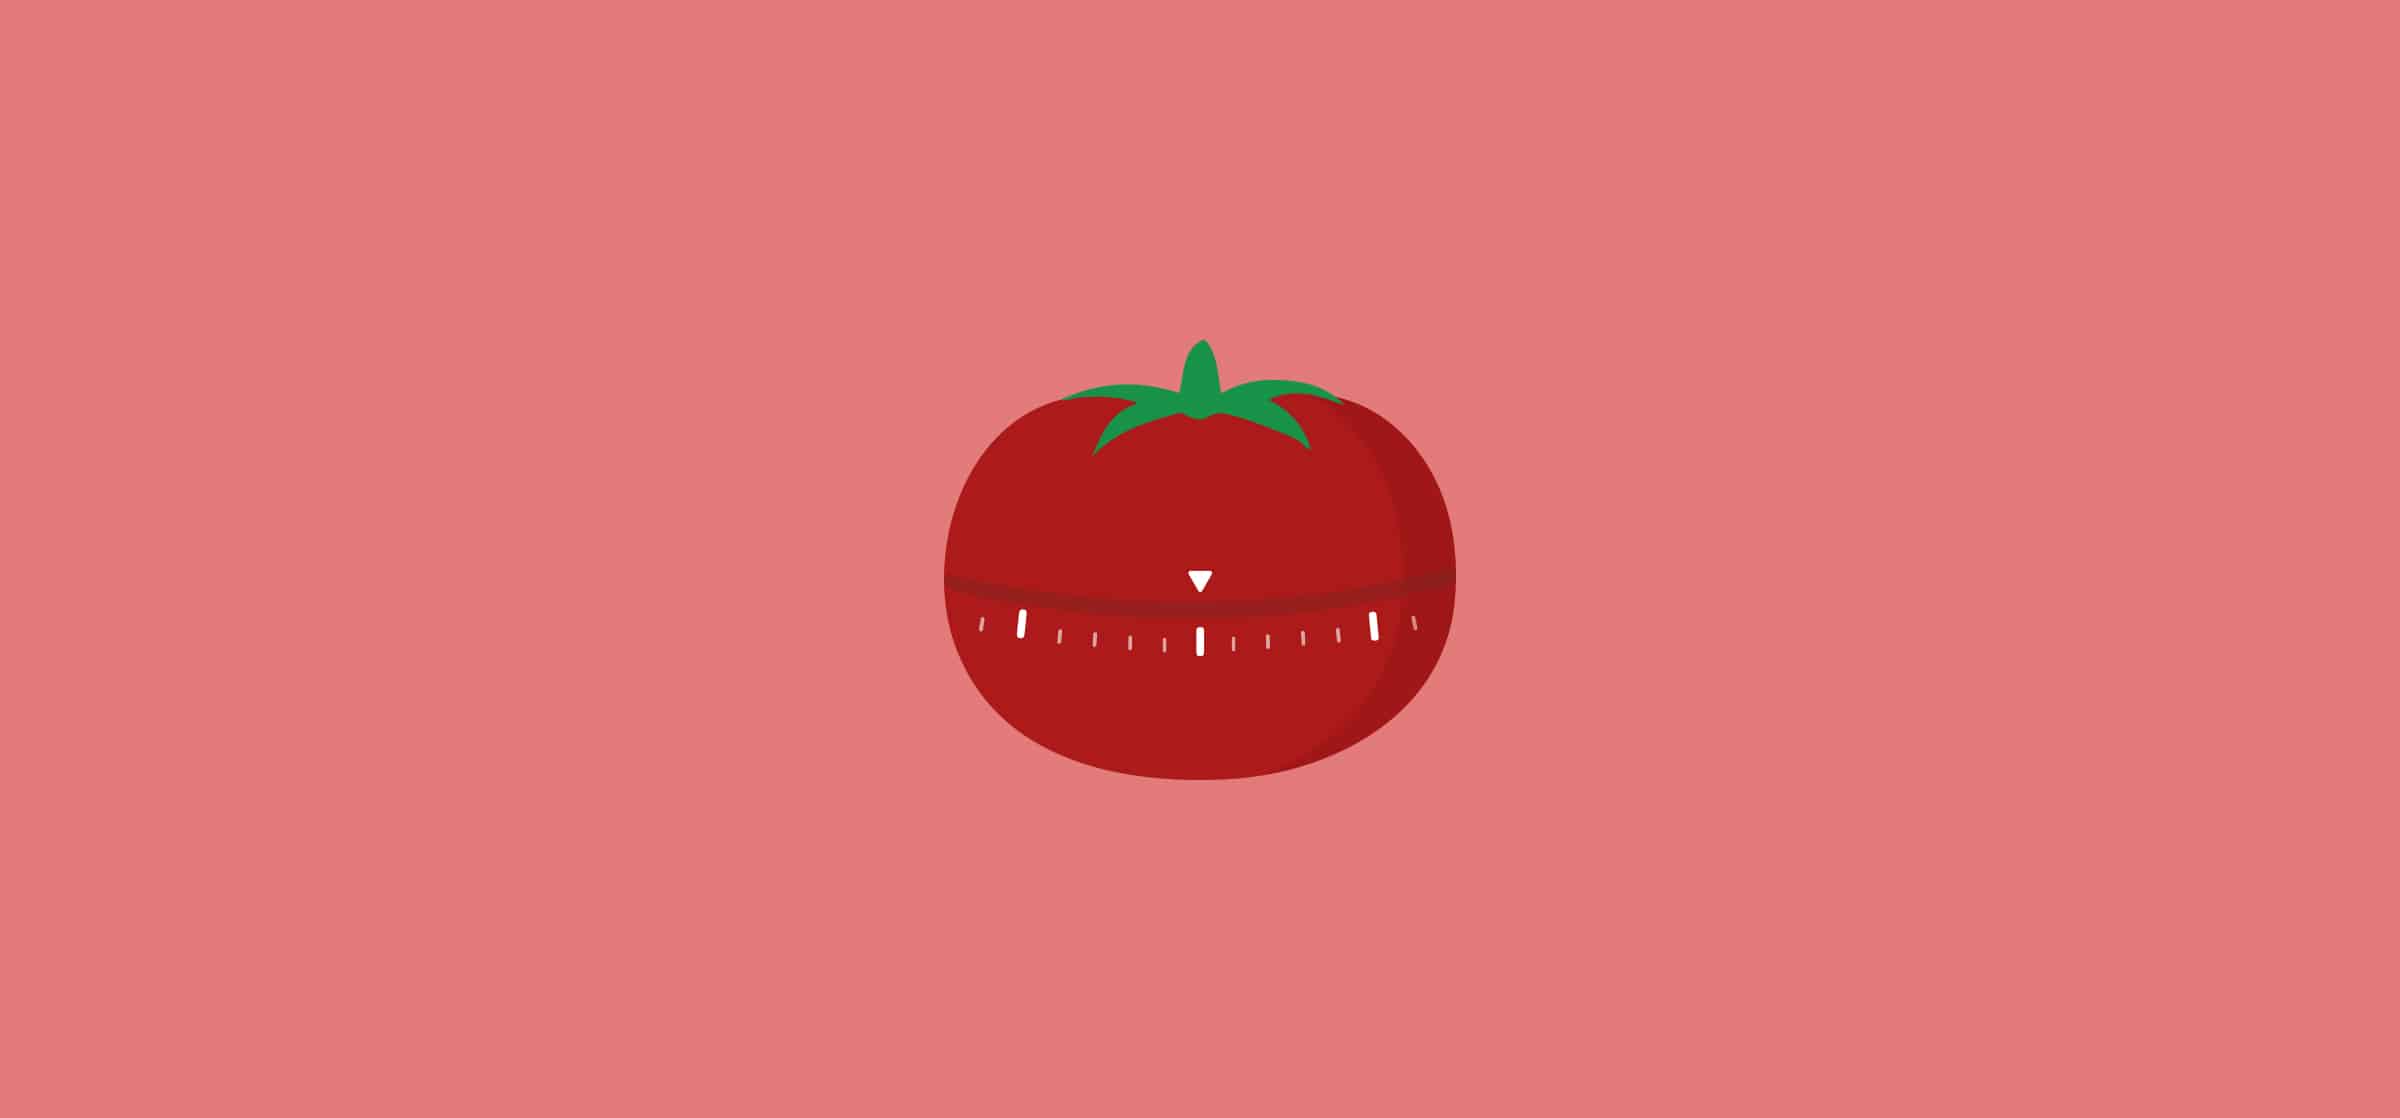 Get More Done in Less Time With the Pomodoro Technique